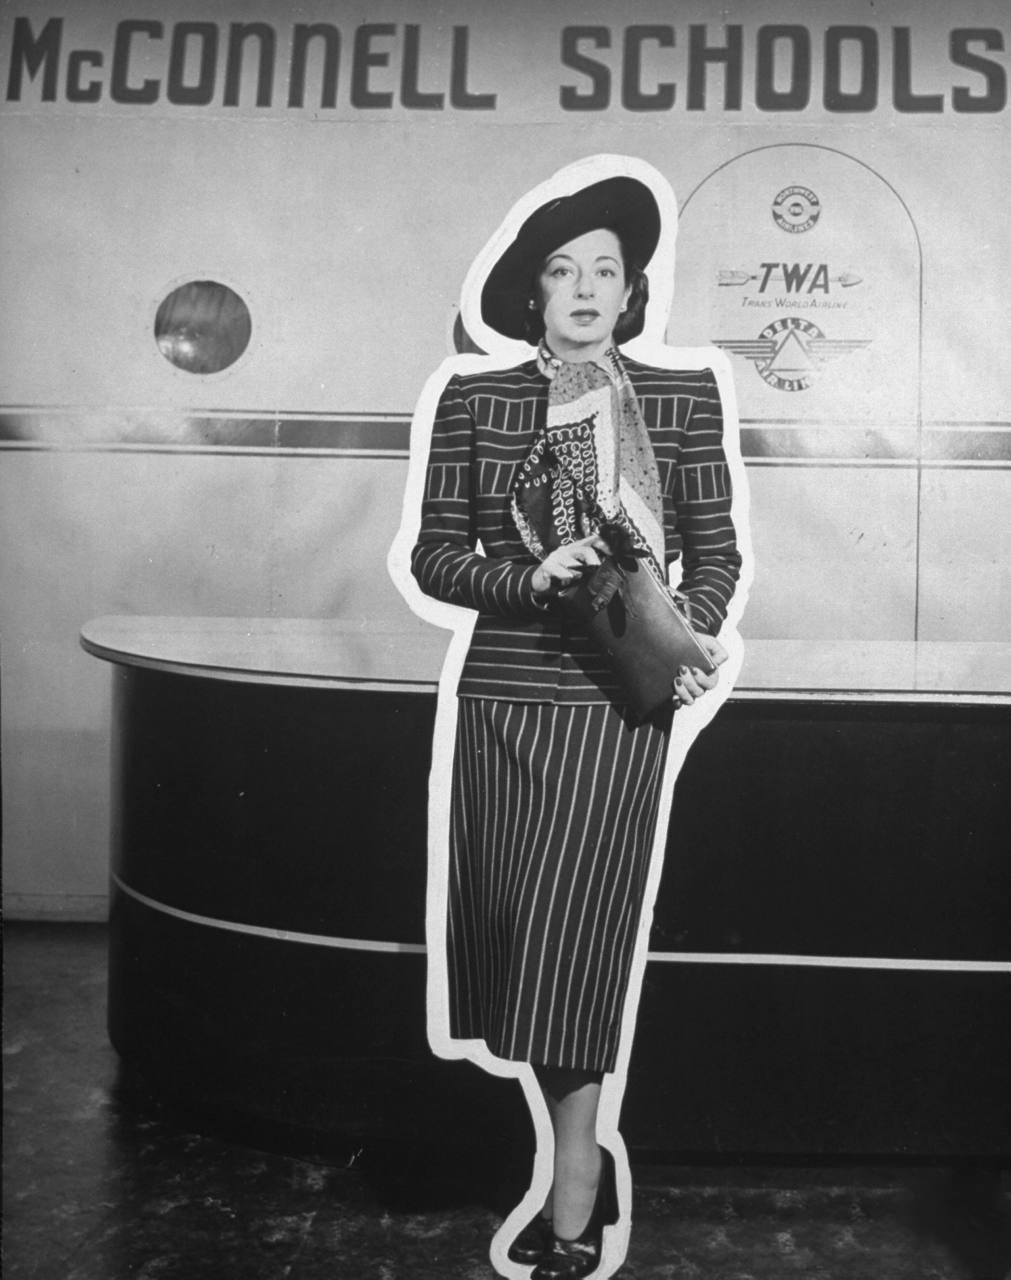 Zell McConnell, owner of the McConnell Air Hostess School.